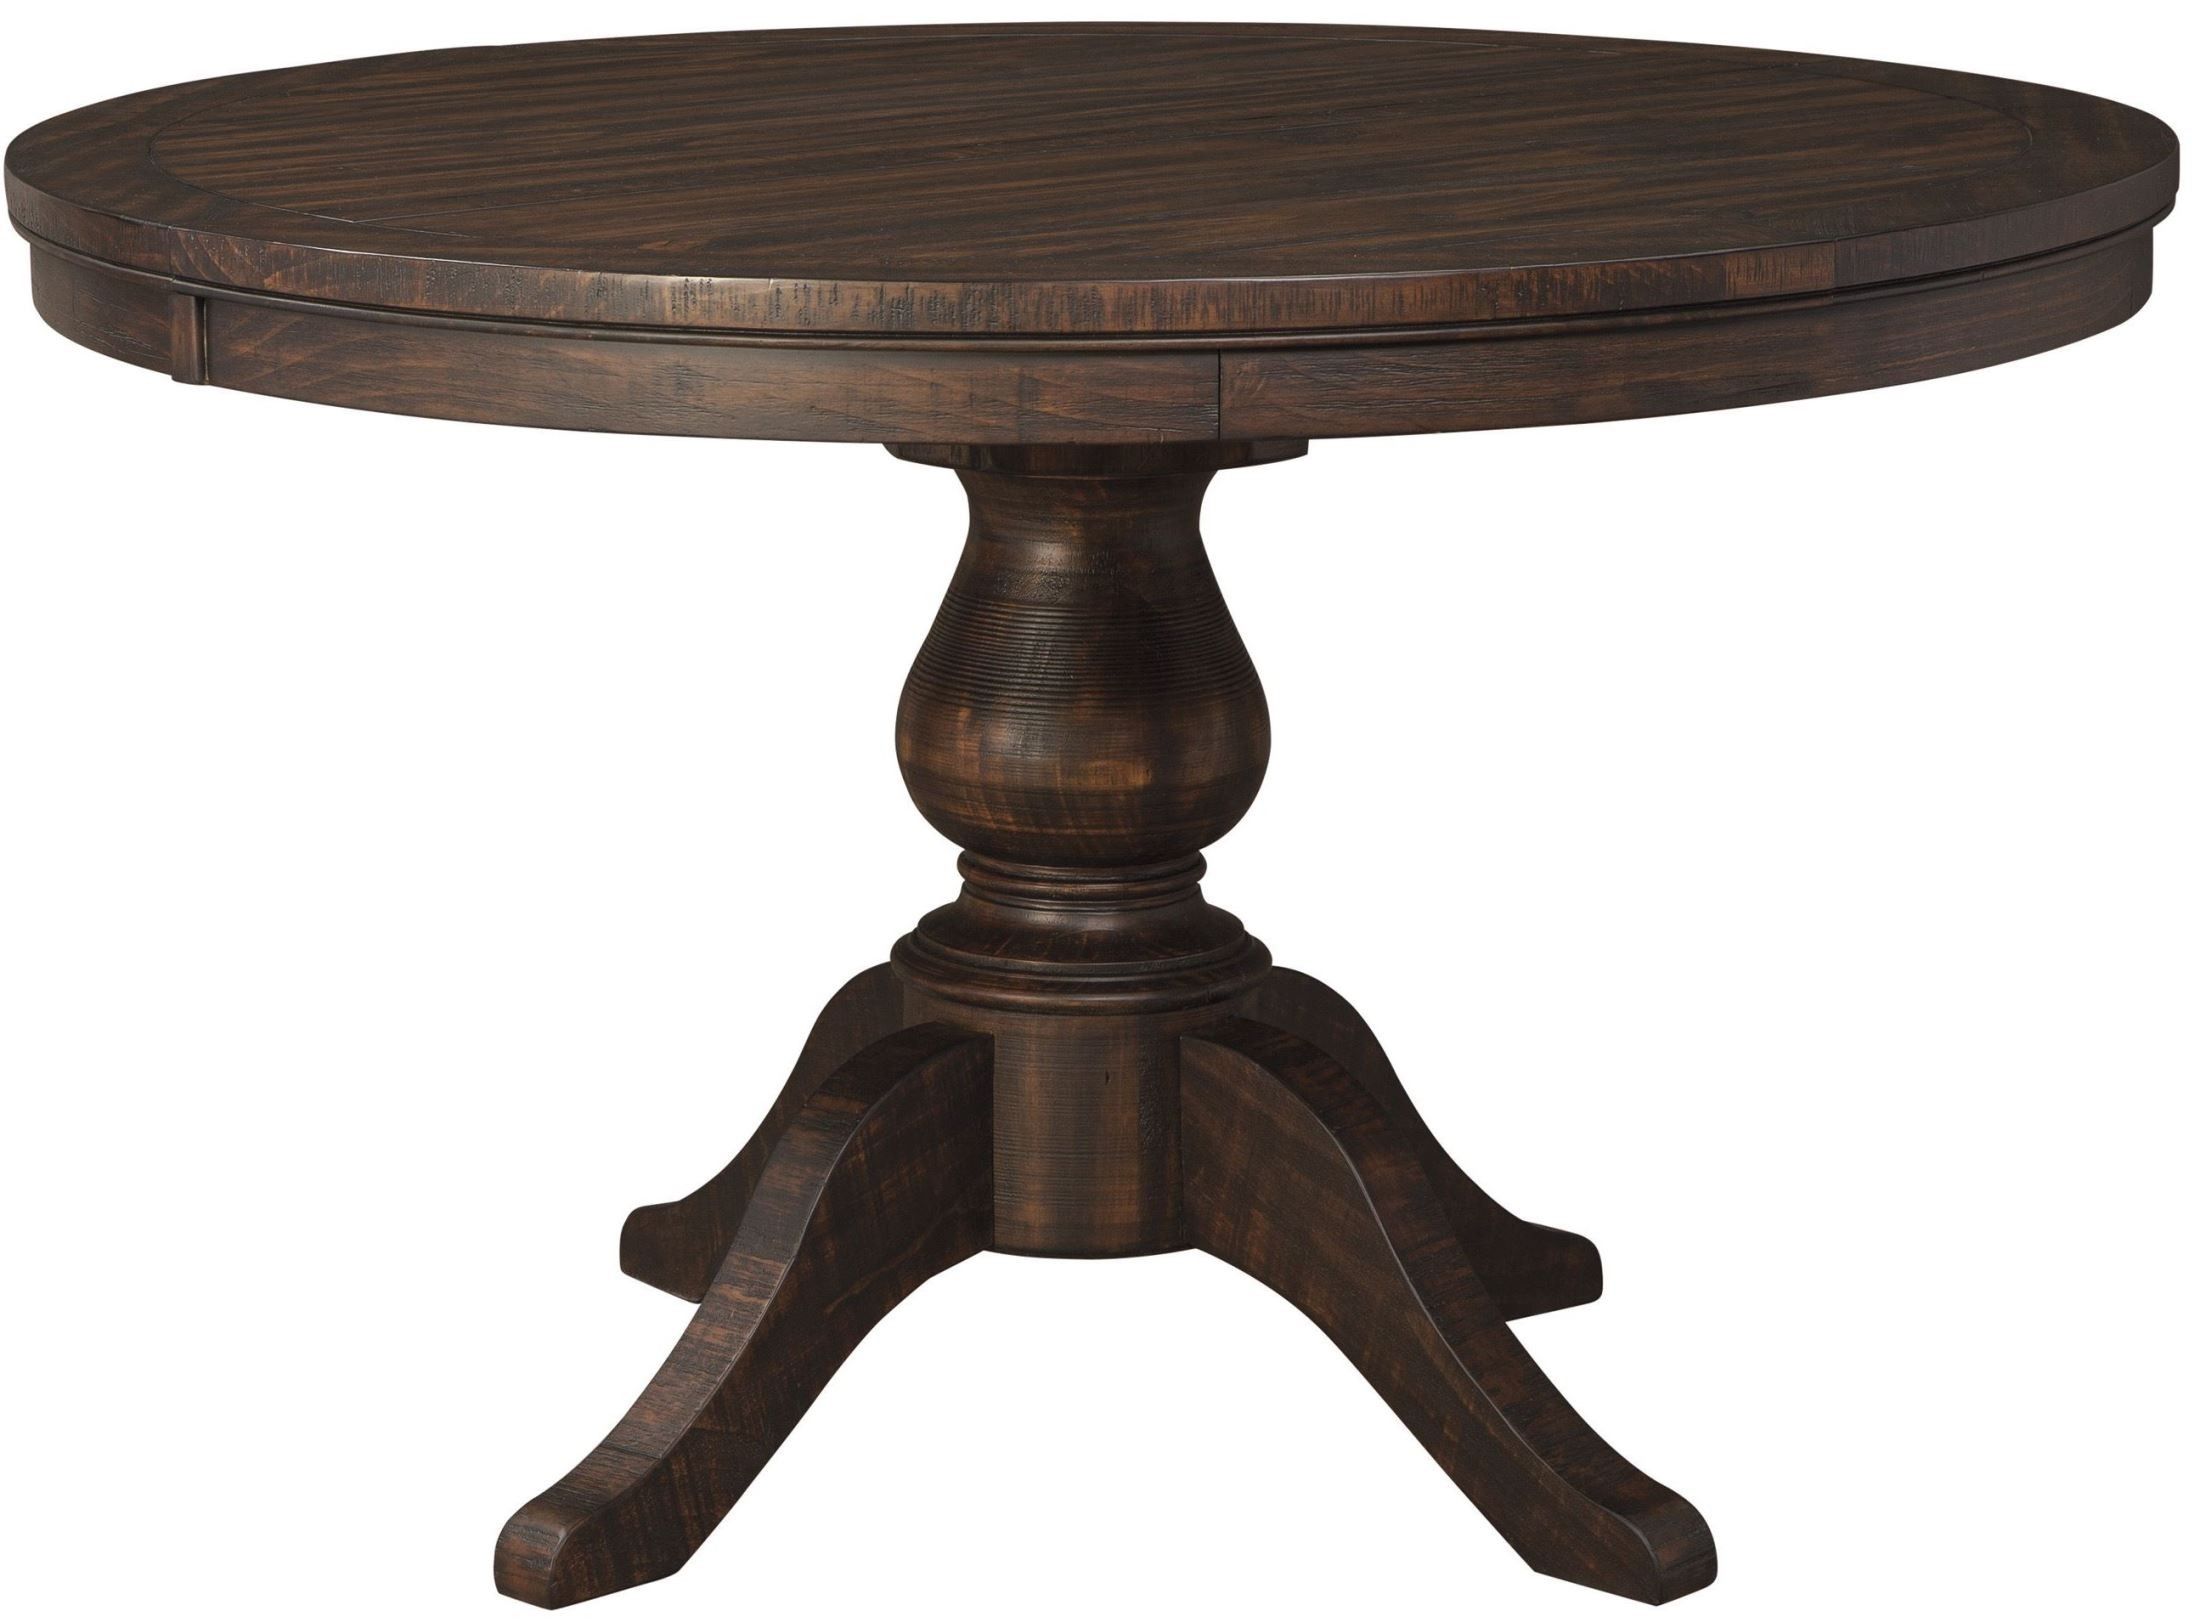 Dining Tables: Pedestal Dining Table Pedestal Dining Table With Leaf For Latest Caira Extension Pedestal Dining Tables (View 20 of 20)